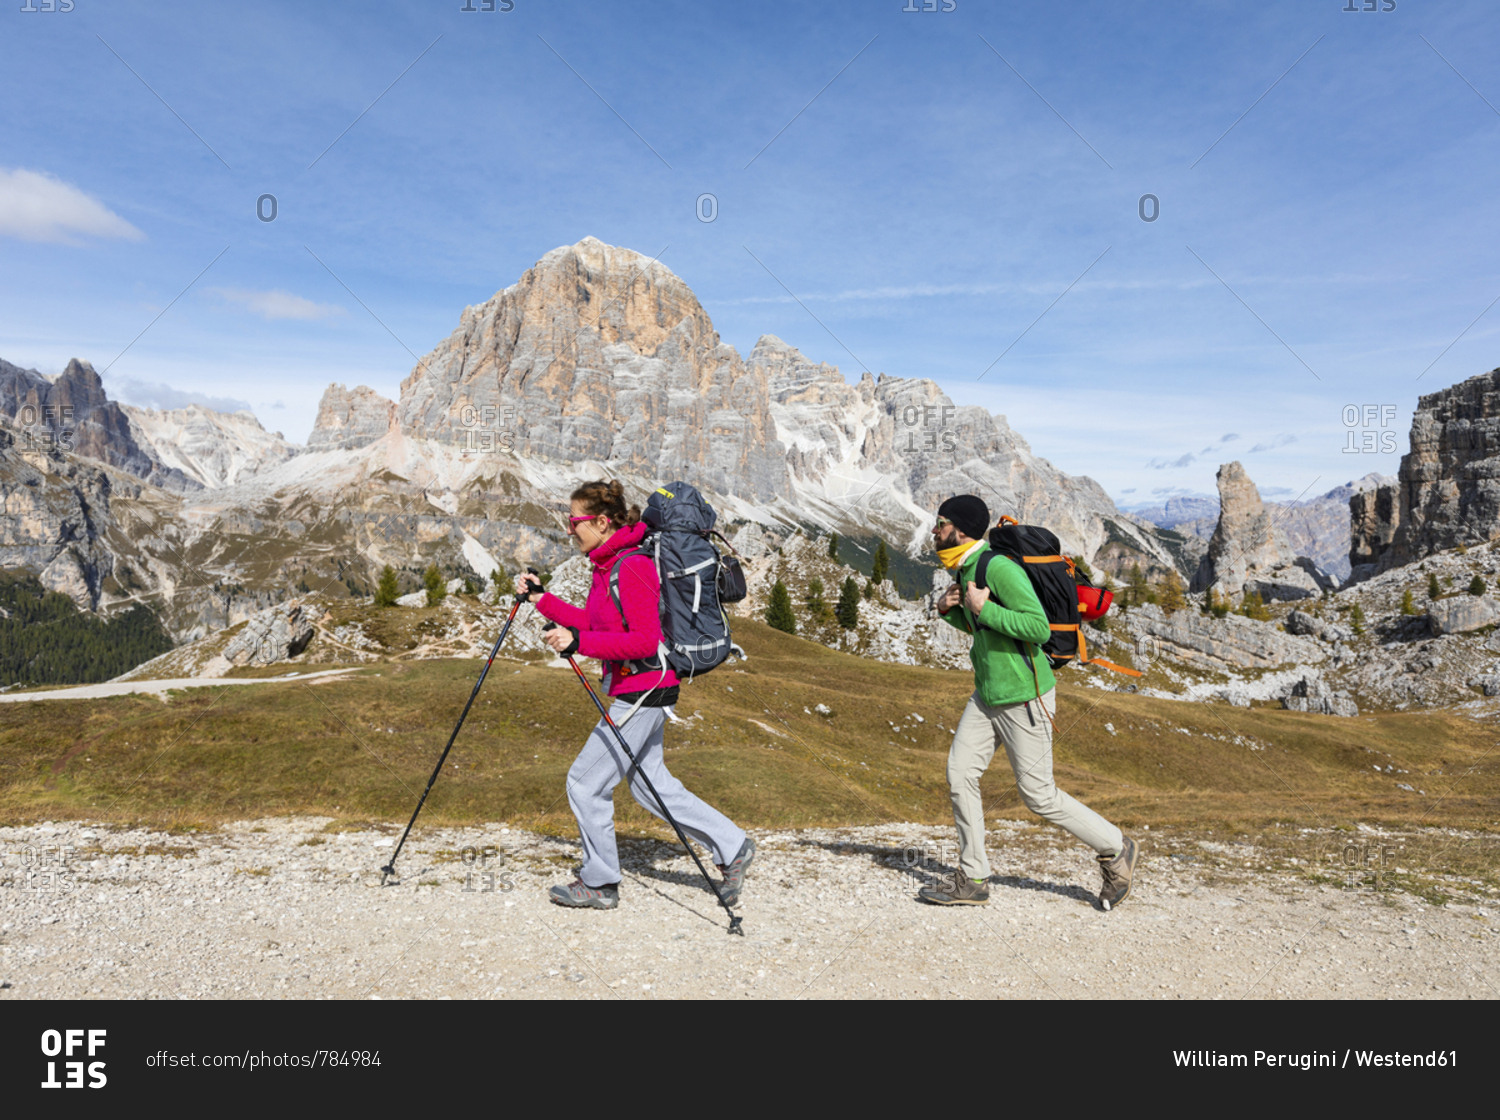 Italy- Cortina d'Ampezzo- two people hiking in the Dolomites mountain area